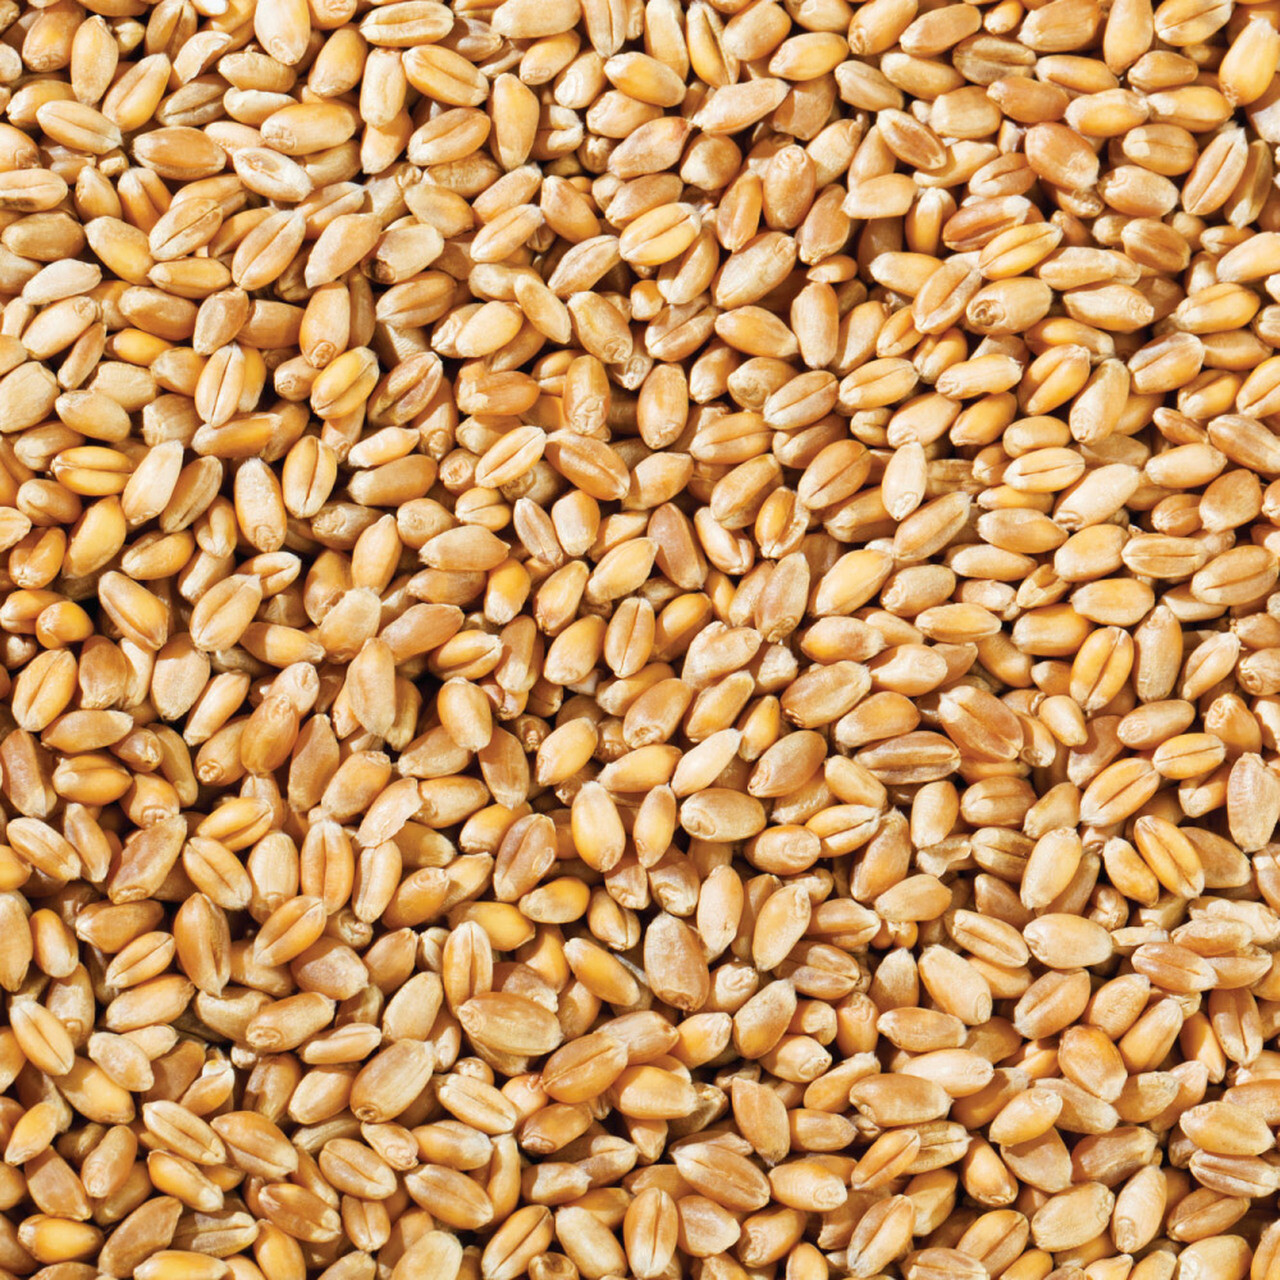 AMMAS GROCERY EXPERTS WHEAT 1 KG